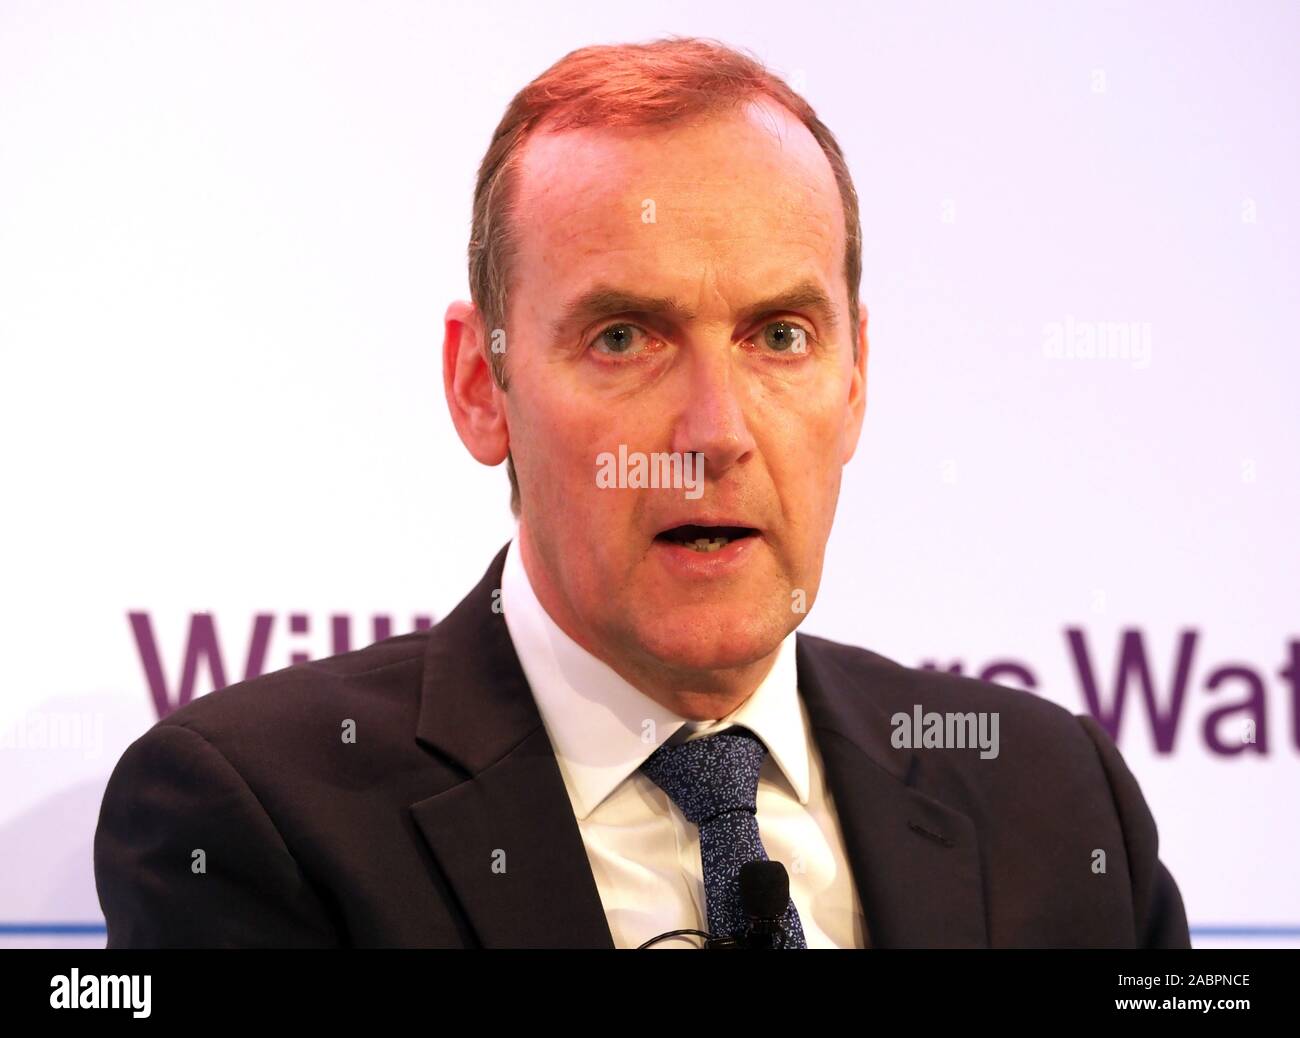 London, UK. 28th Nov, 2019. AOA Conference London UK, Andrew Cowan Chief Executive Manchester Airport.  Picture by Geoff Moore Credit: Dorset Media Service/Alamy Live News Stock Photo